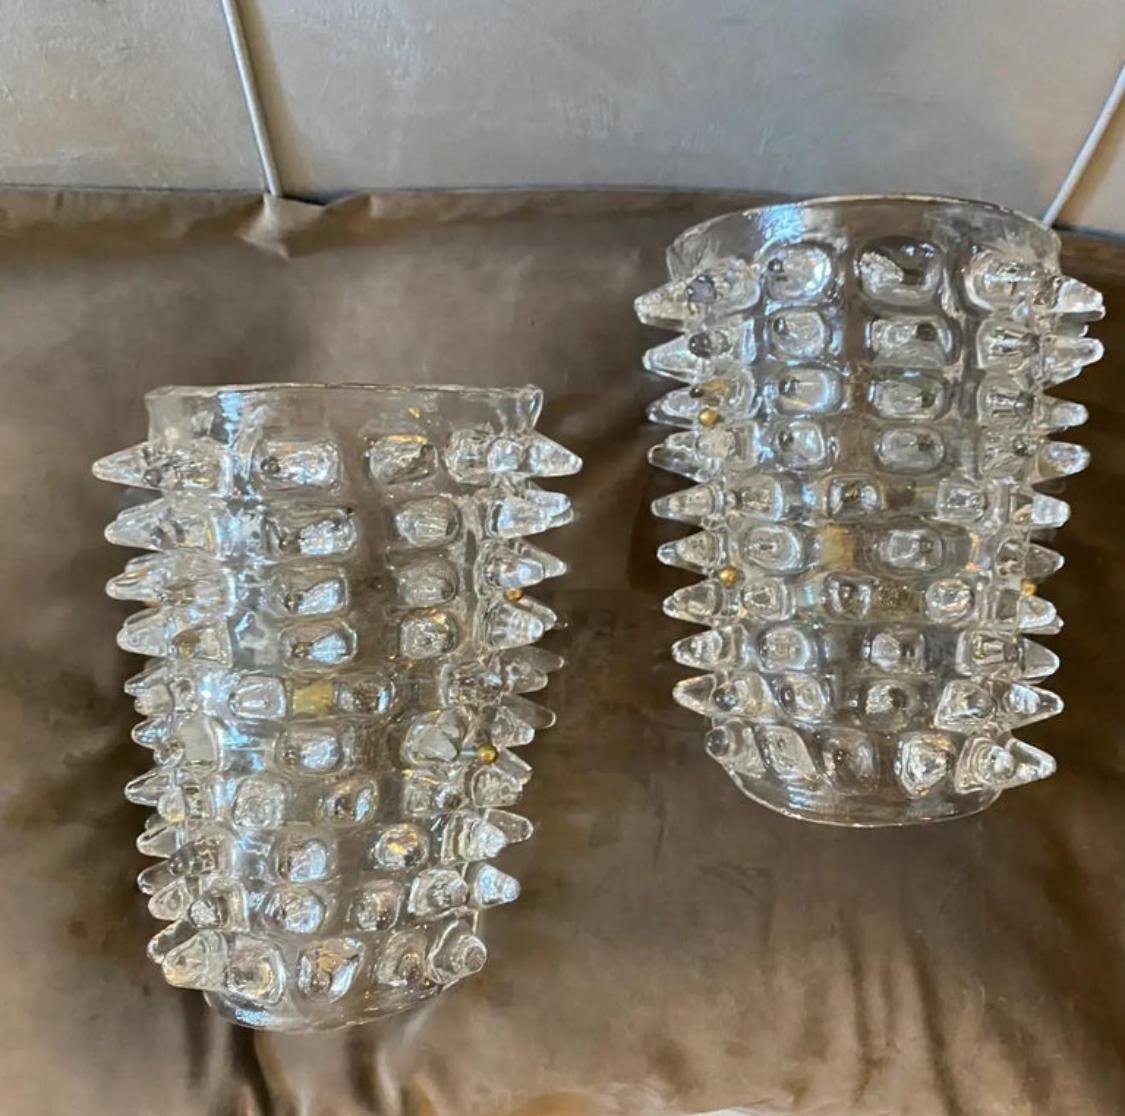 Two 1980s Mid-Century Modern Barovier Style Rostrato Murano Glass Wall Sconces For Sale 6